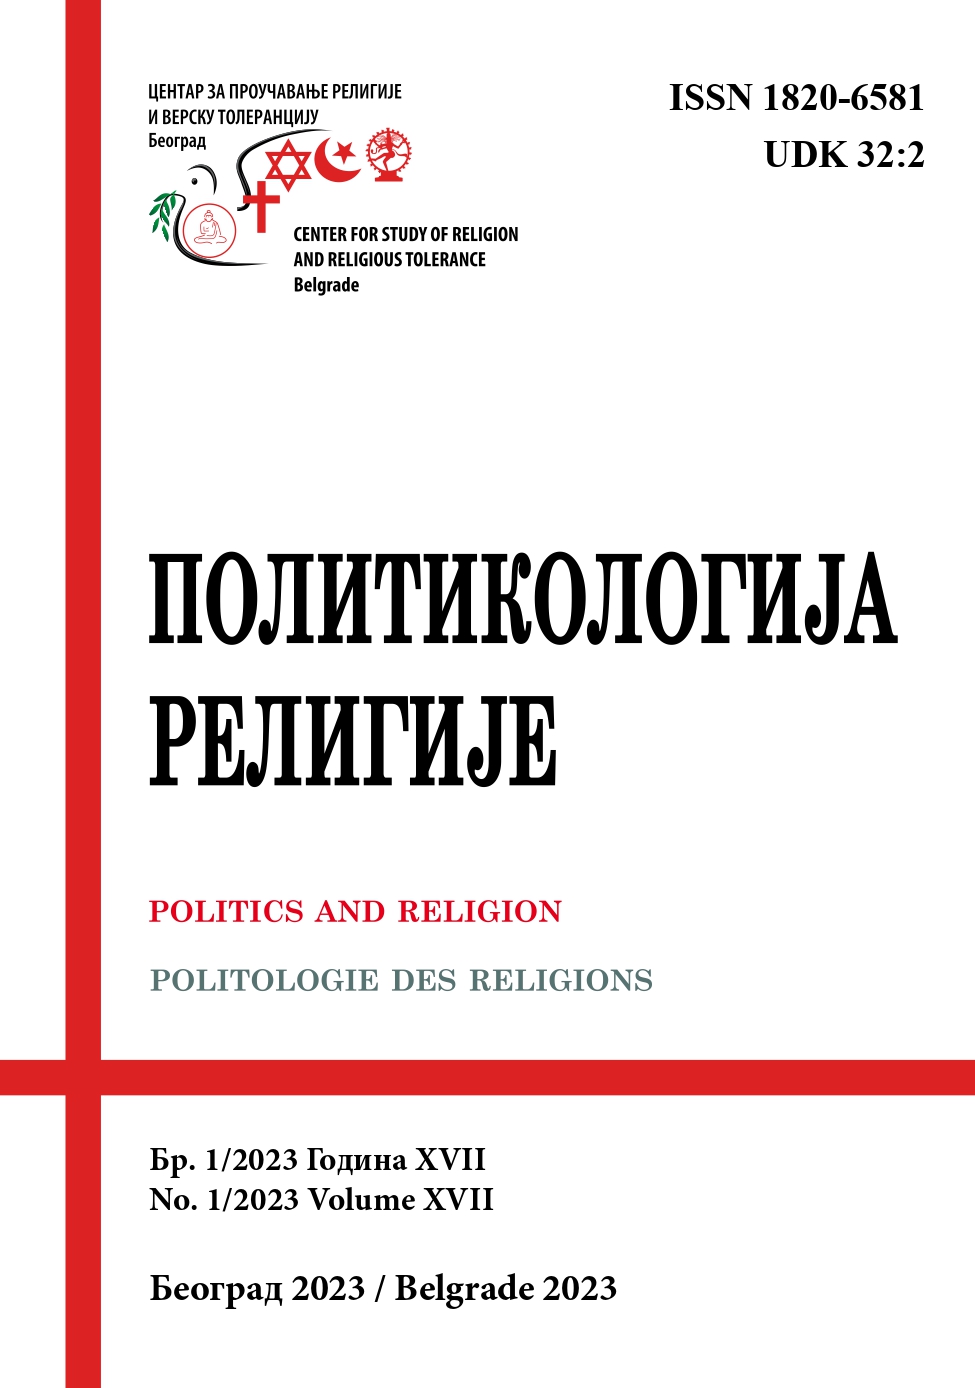 “RELIGION, BIDEN AND SERBIA: RELIGIOUS FACTOR IN THE POLITICS OF PRESIDENT BIDEN ANDHOW COULD IT AFFECT SERBIAN INTERESTS” Cover Image